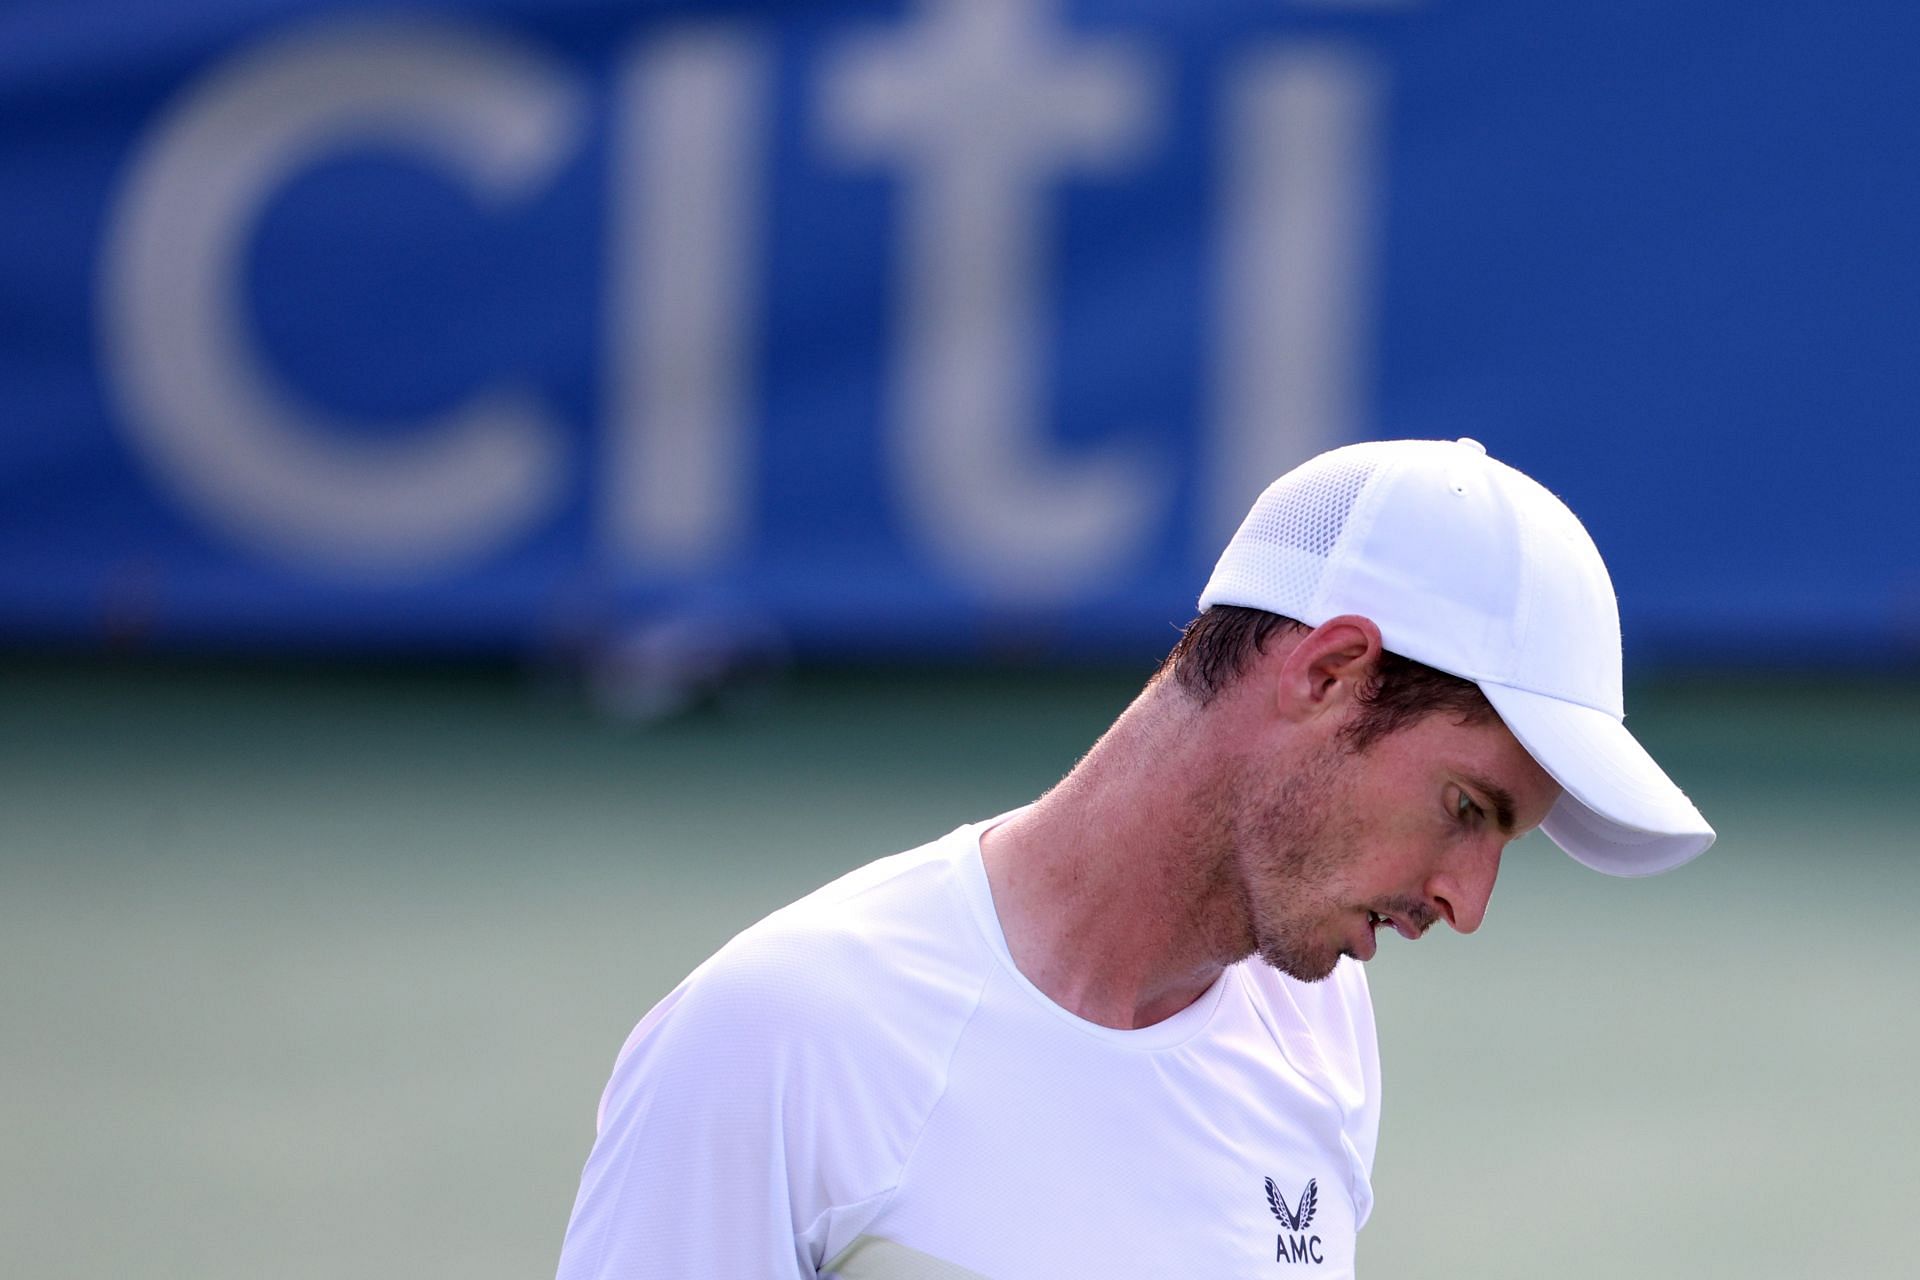 Andy Murray of Great Britain reacts to a shot against Mikael Ymer in Citi Open - Day 3